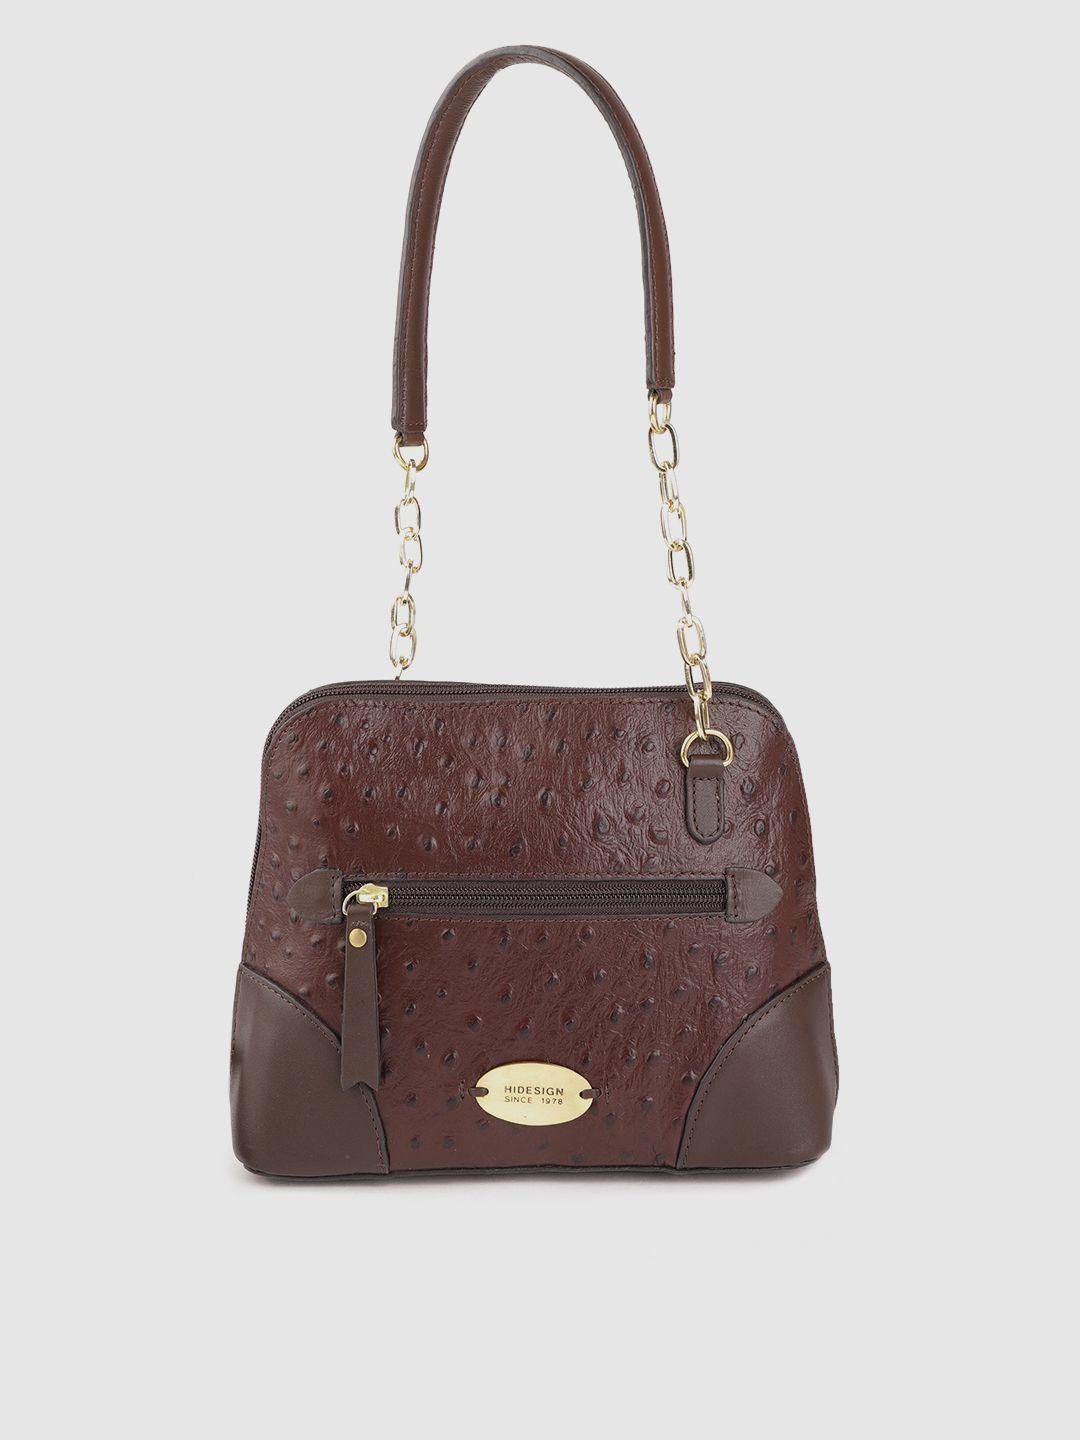 hidesign coffee brown textured leather structured shoulder bag